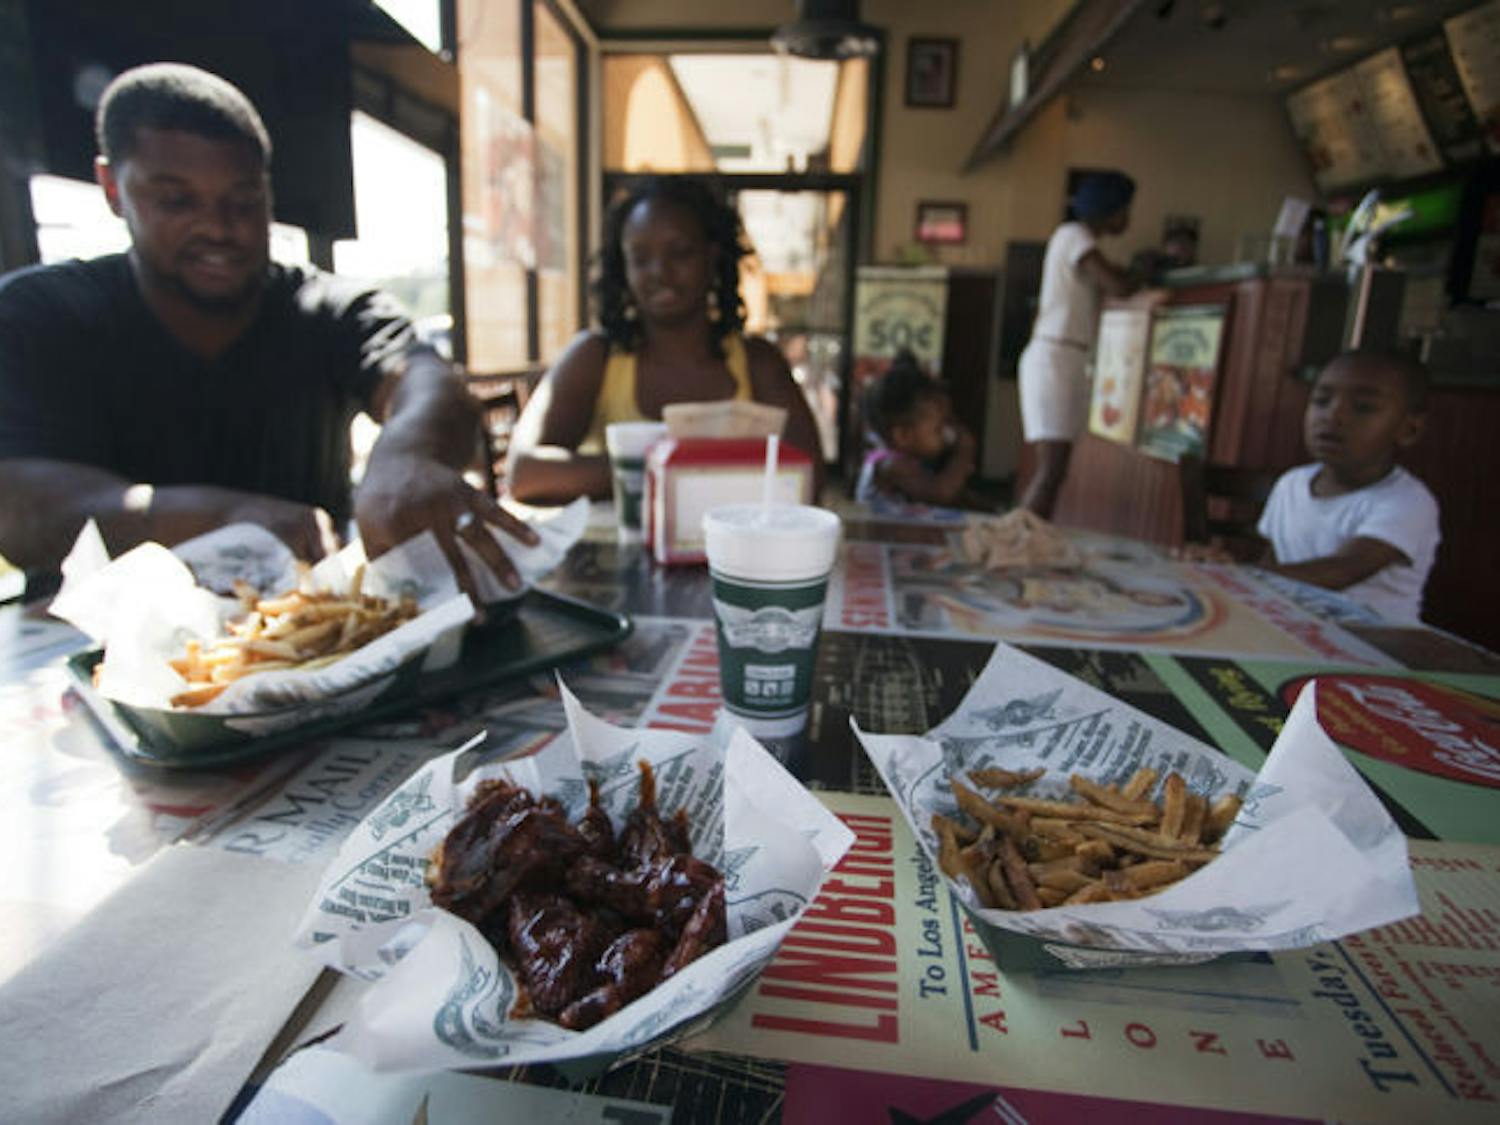 Juan and Annie Jones, of Lake City, eat an early dinner with their children at the Wingstop on Southwest 20th Avenue. The opening of two additional branches in the Gainesville area is currently in the works.